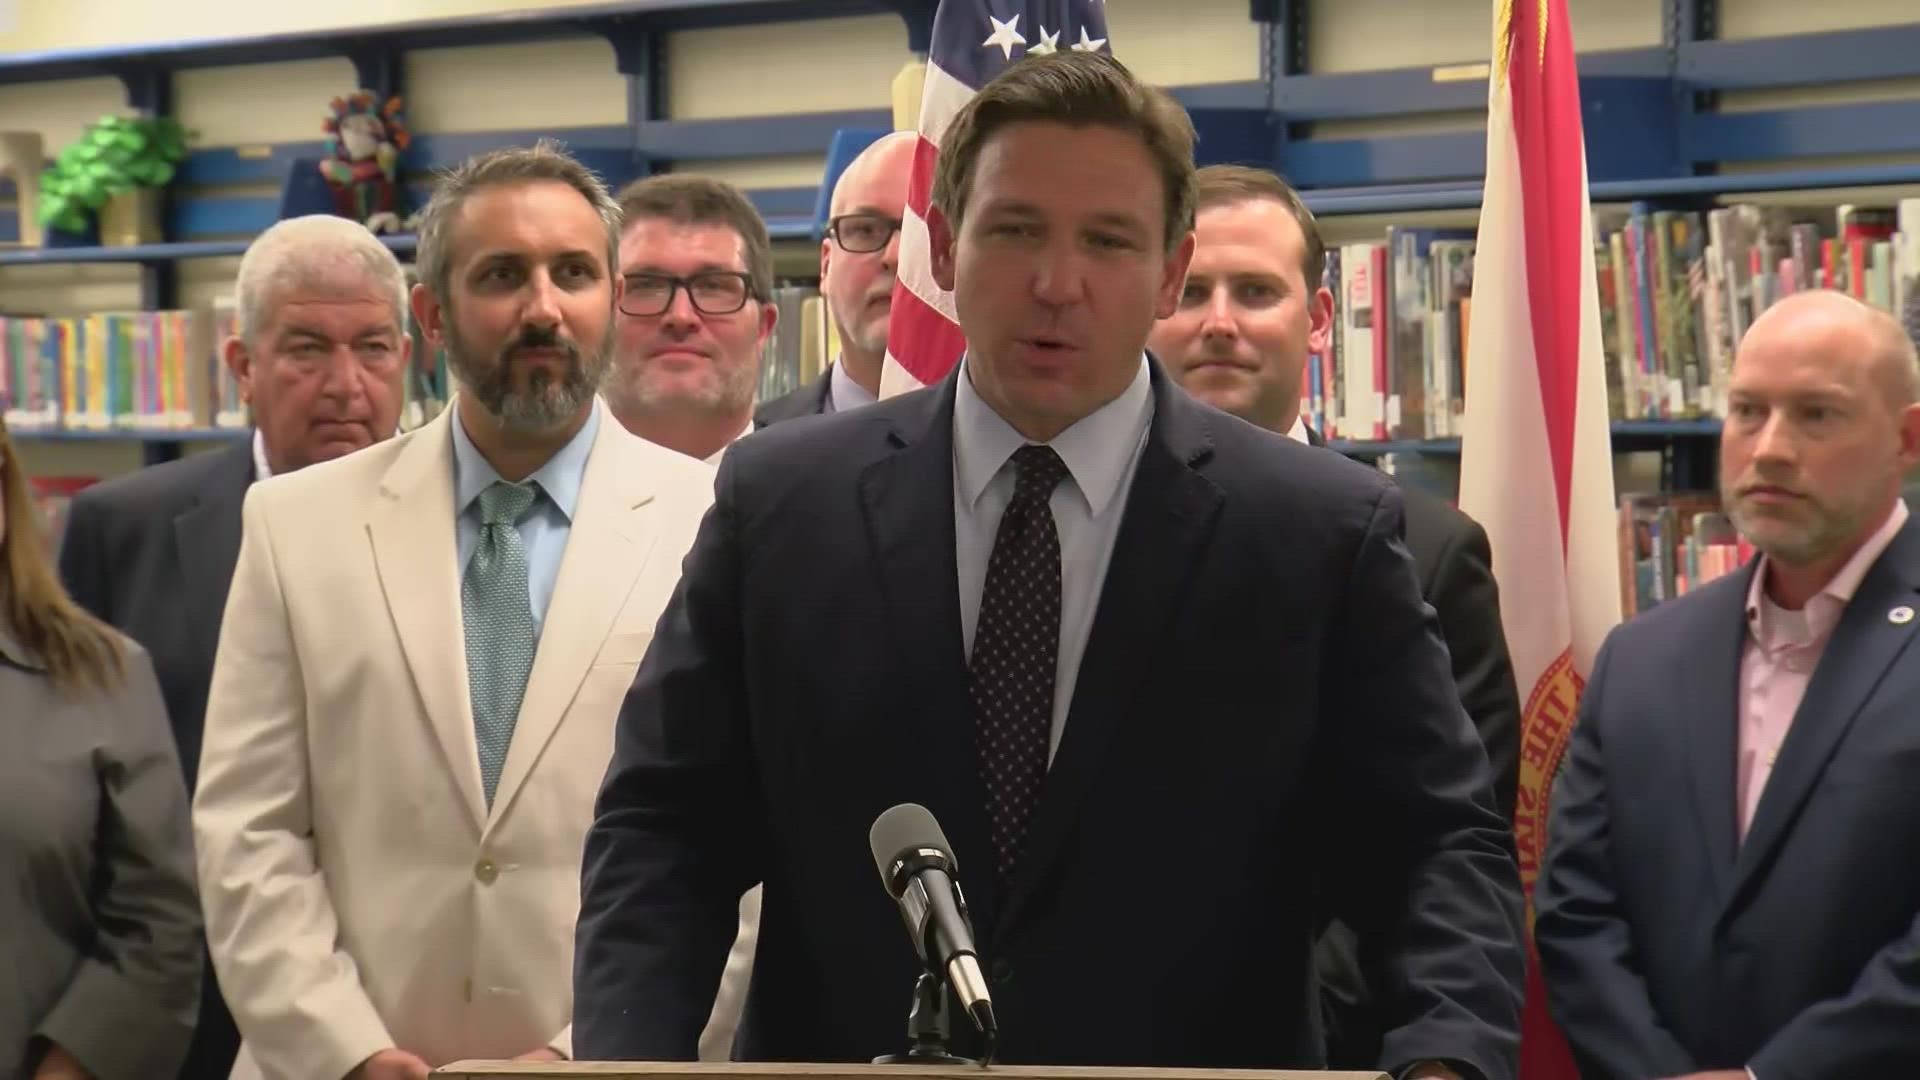 DeSantis said FL students will learn "how to be responsible citizens ... a good knowledge of American history and the principles that underlie our Constitutition.